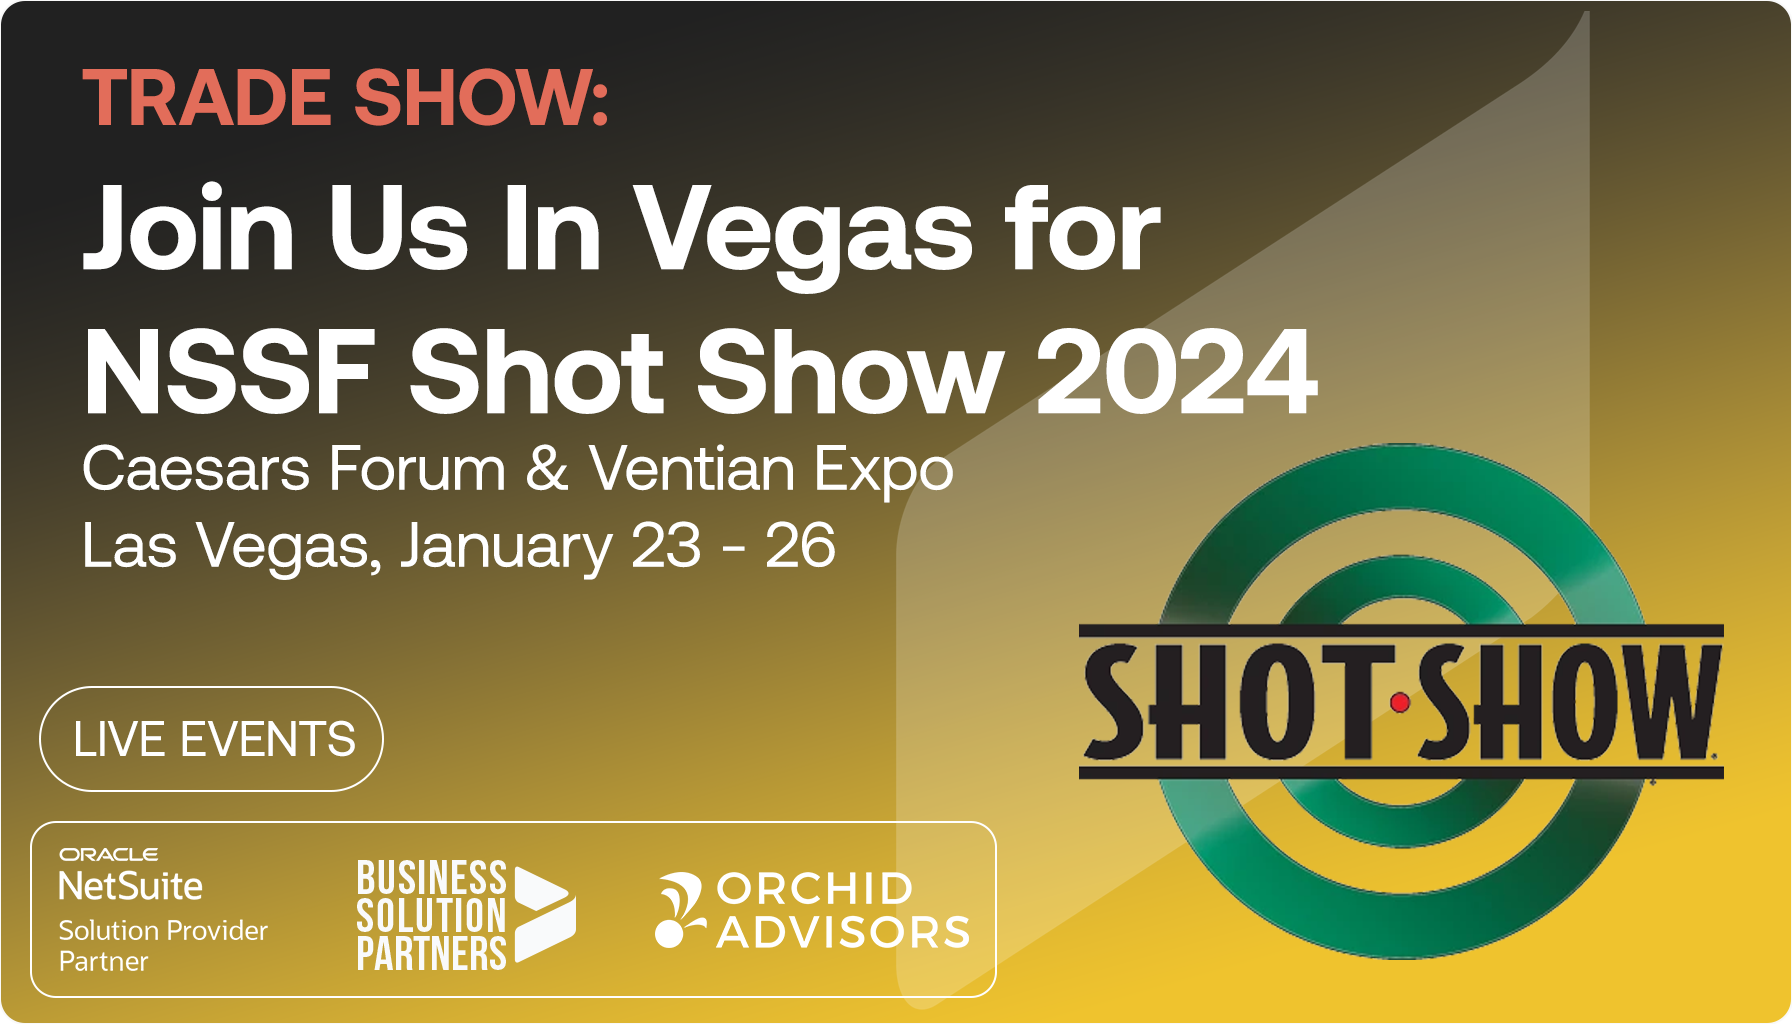 Join Business Solution Partners & Orchid Advisors at SHOT '24